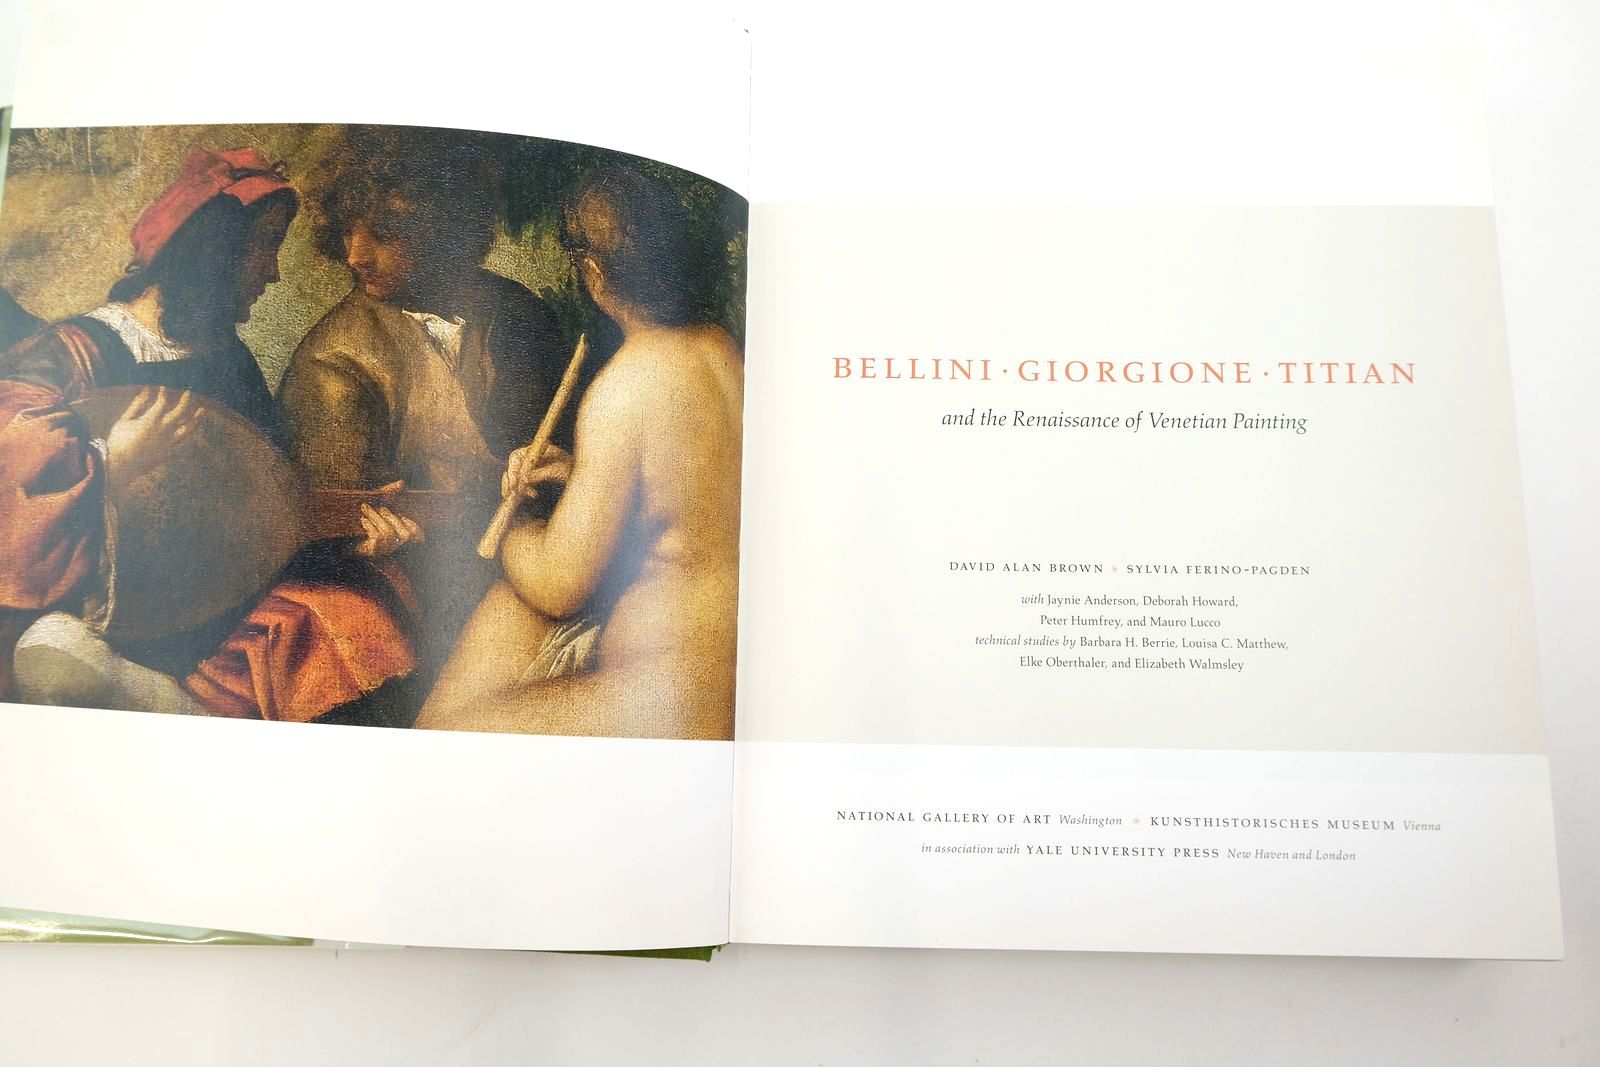 Photo of BELLINI, GIORGIONE, TITIAN AND THE RENAISSANCE OF VENETIAN PAINTING written by Brown, David Alan
Ferino-Pagden, Sylvia
Anderson, Jaynie
Howard, Deborah
Humfrey, Peter
et al, illustrated by Bellini, Giovanni
Giorgione,
Titian, published by The National Gallery Of Art, Washington, Kunsthistorisches Museum Wien, Yale University Press (STOCK CODE: 2139017)  for sale by Stella & Rose's Books